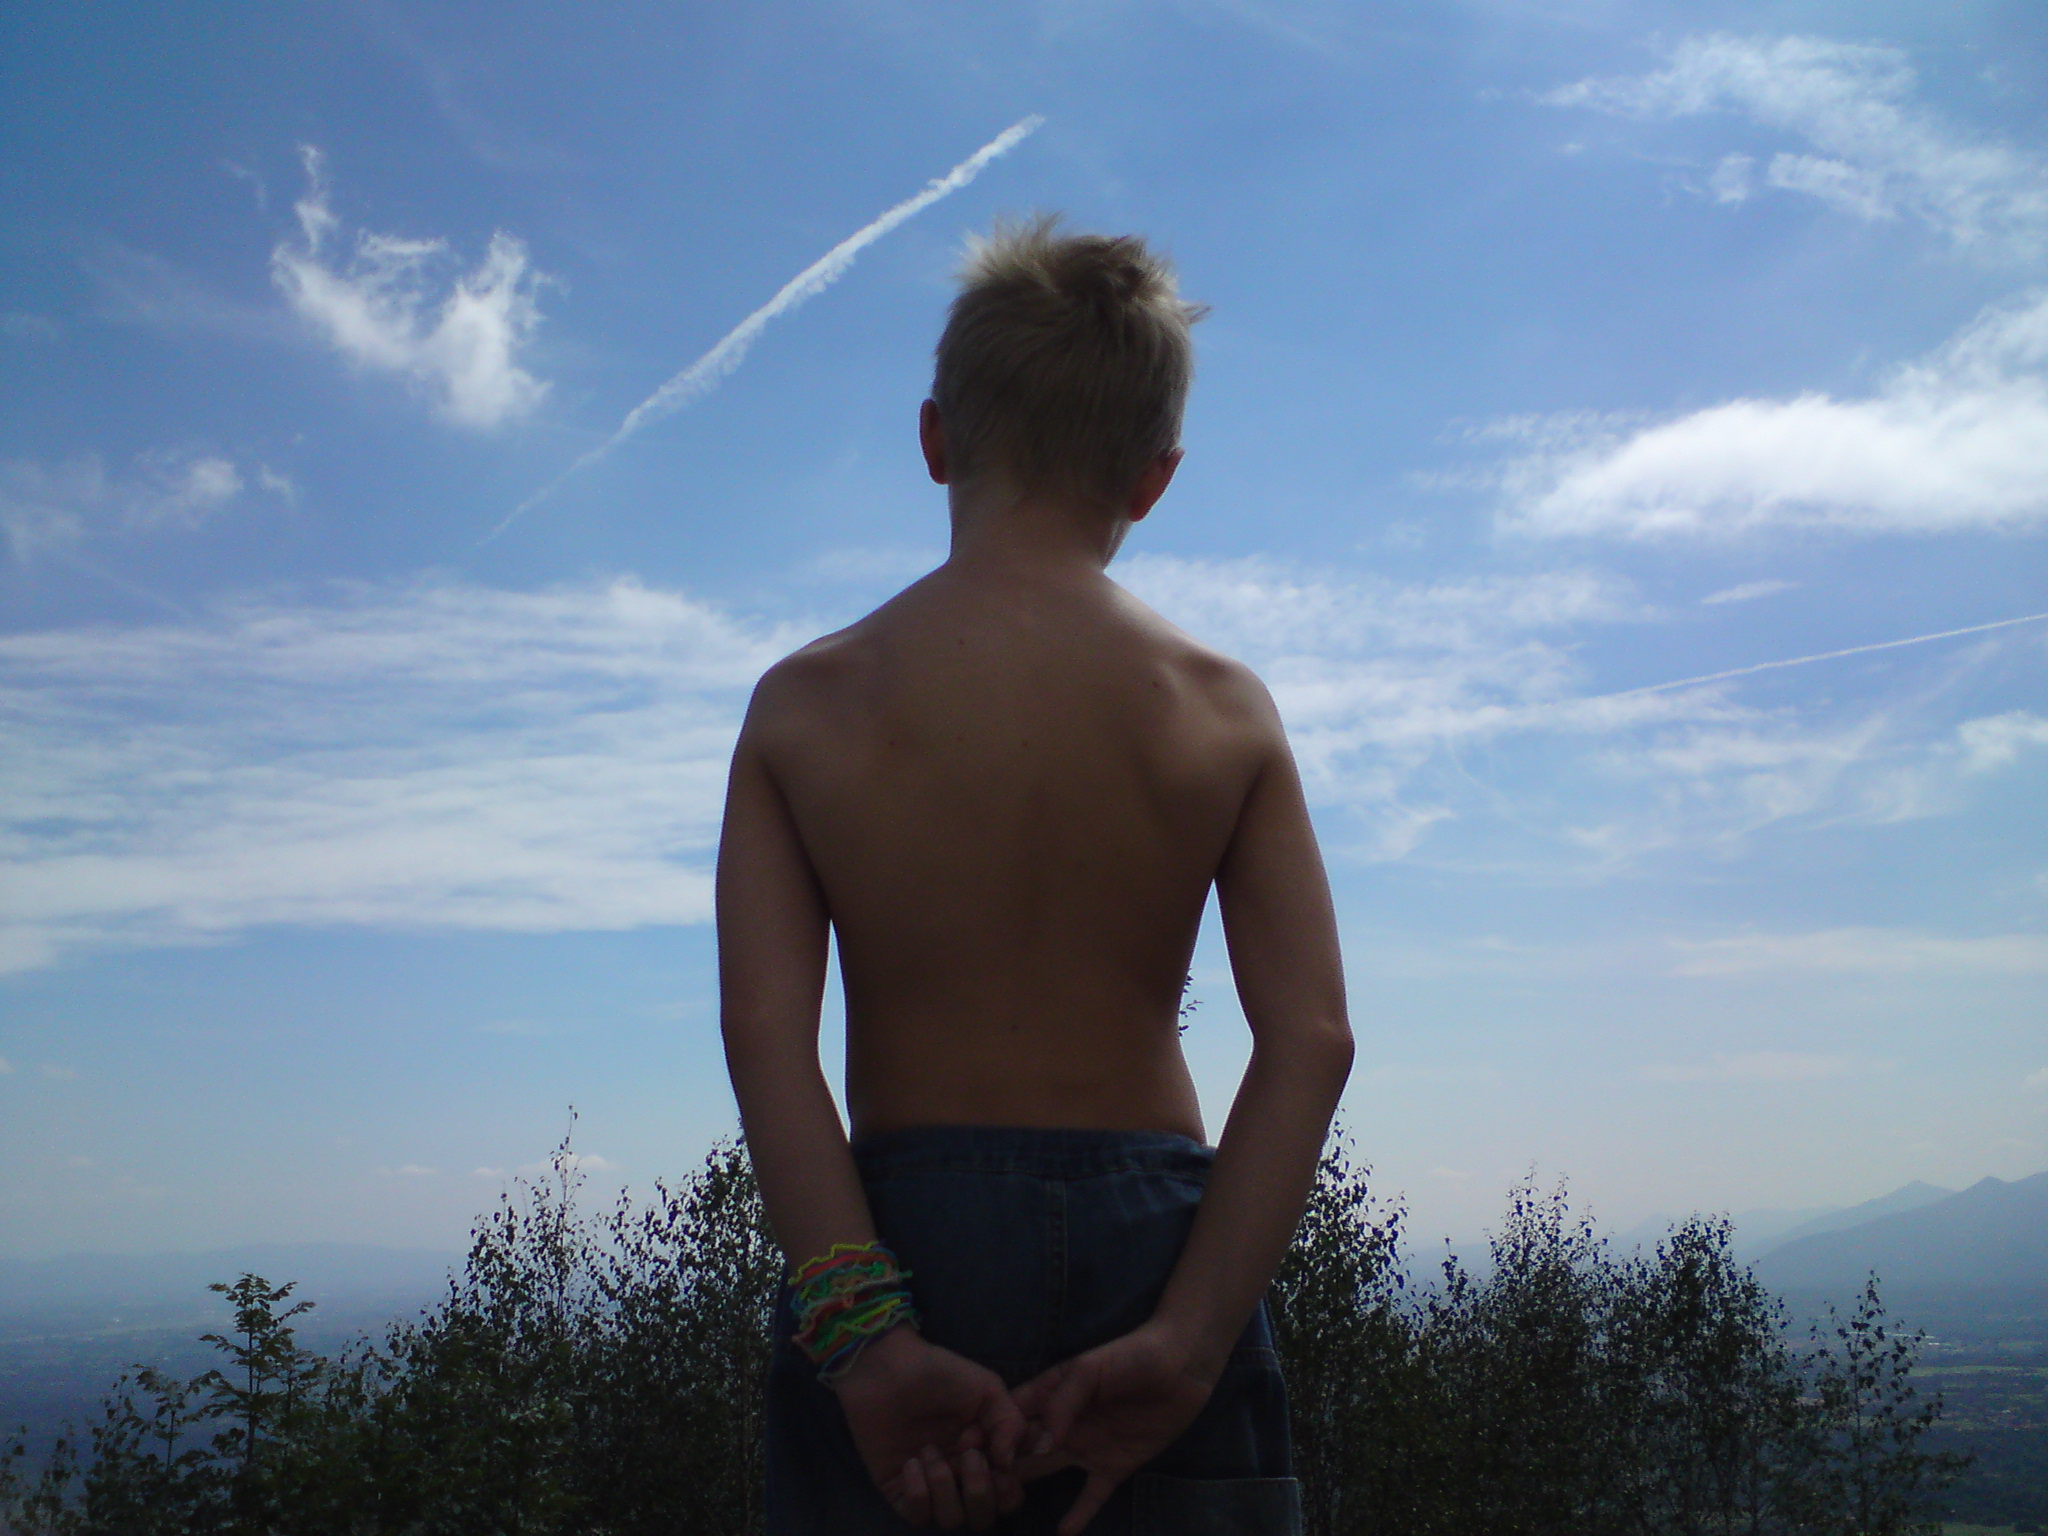 Emerging. A child stands with their bare back to the camera, looking out at a blue sky. They have short blond hair and are holding their hands behind them. Their lower half is obscured by long grass which is in shadow